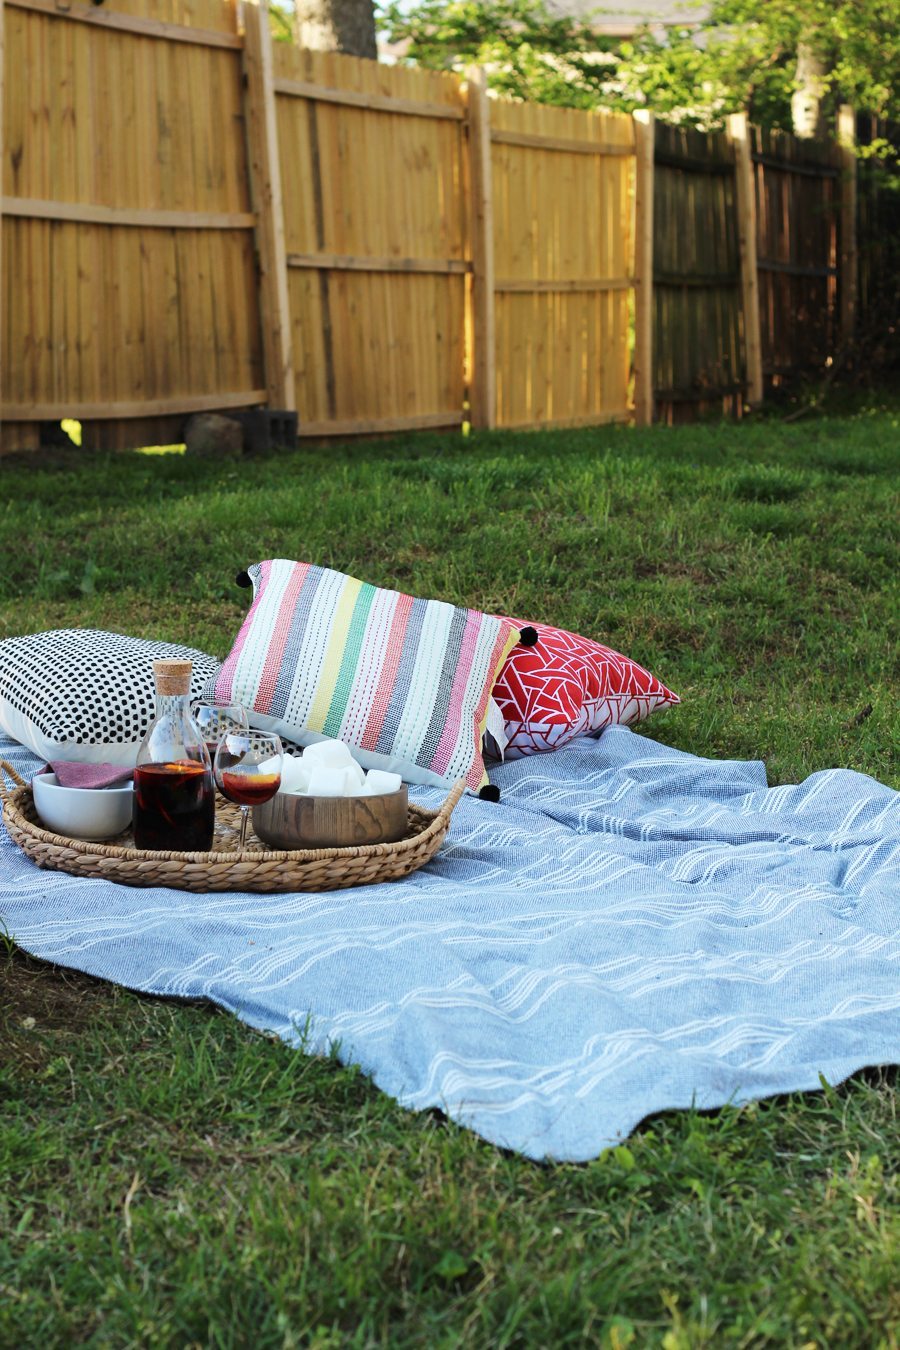 The Only 4 Things You Need for a Backyard Chill Session | DARLING